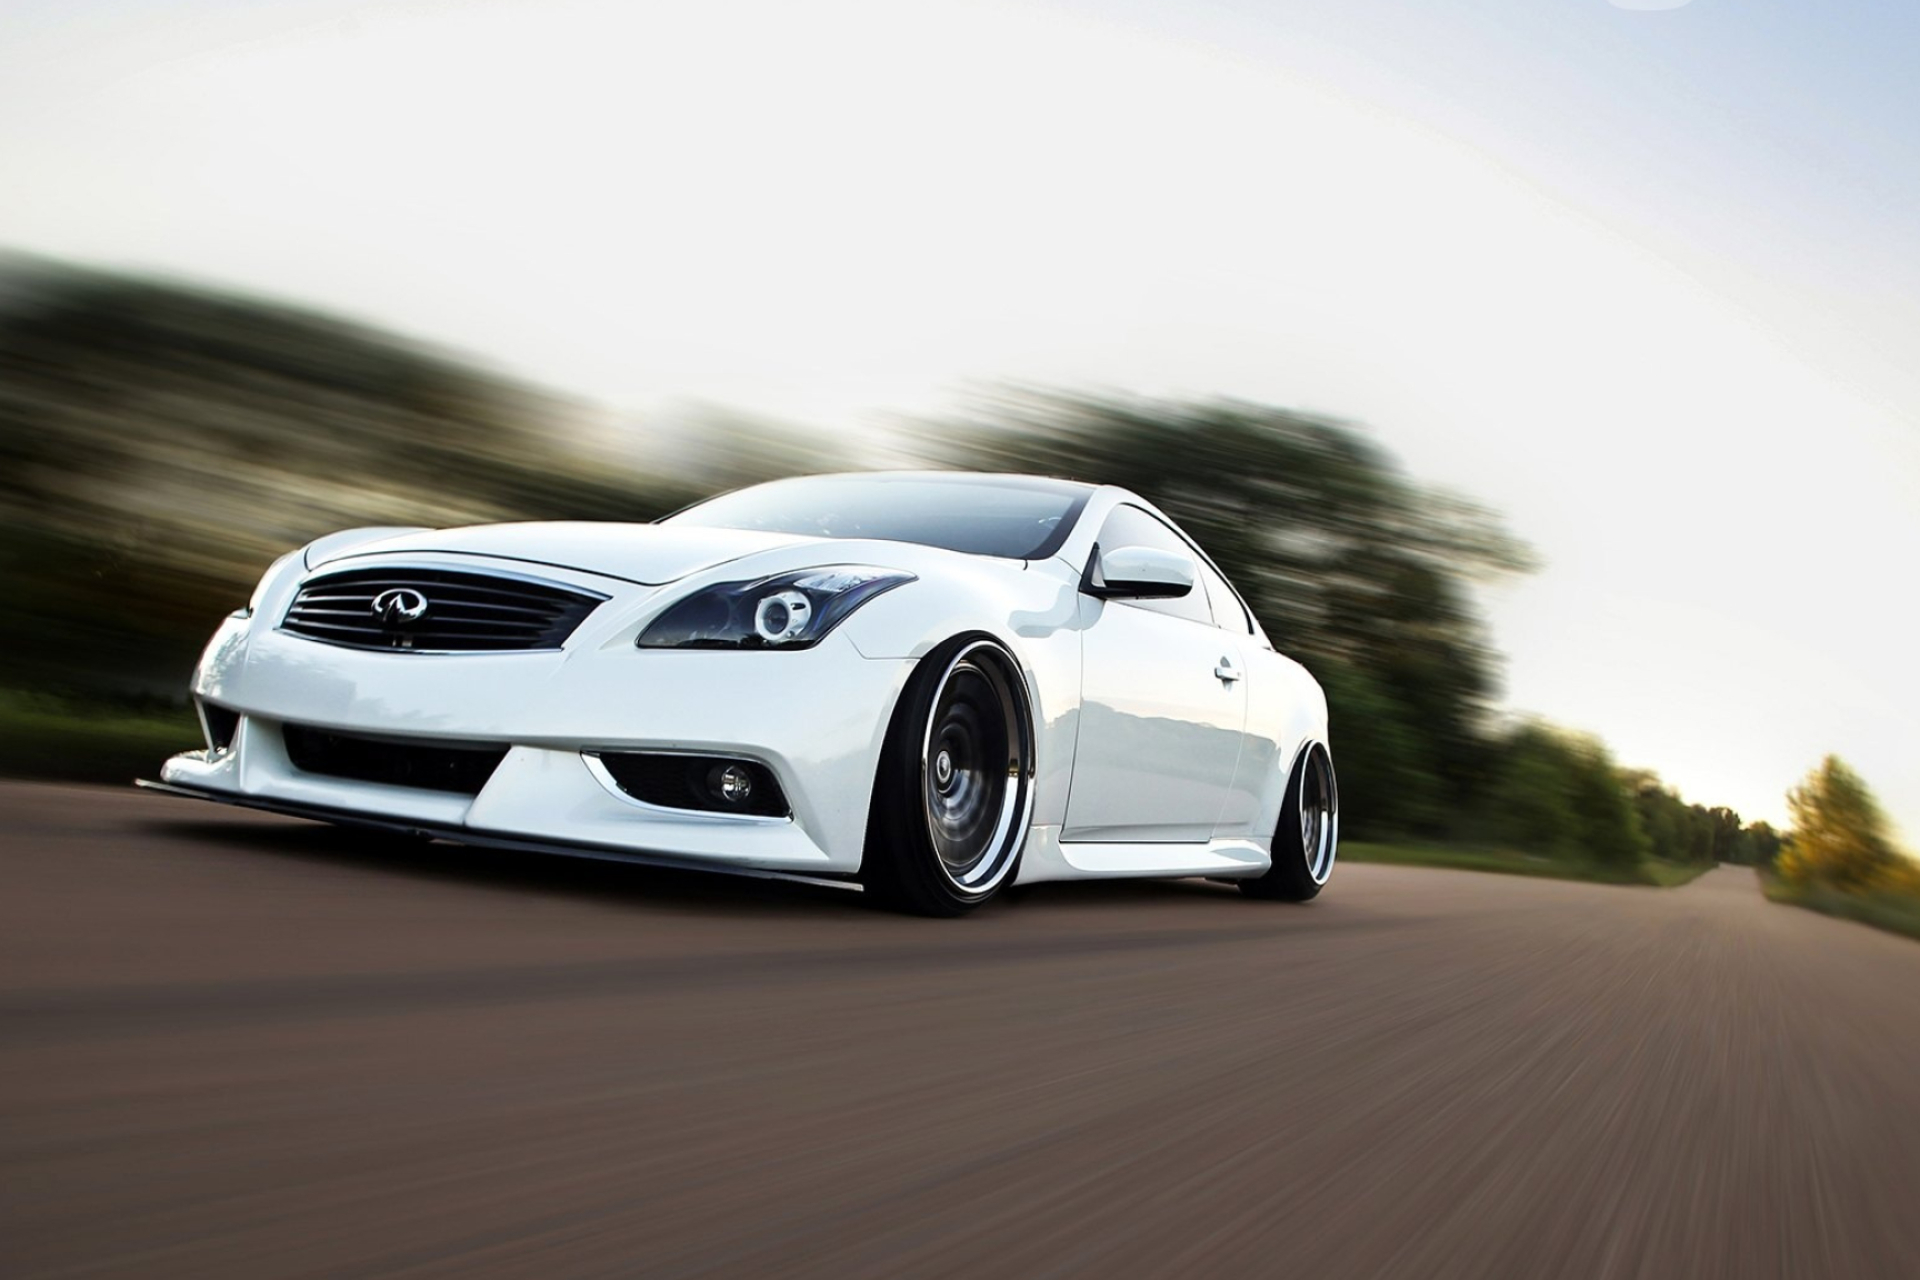 HD wallpaper, Blacked Out Grille, Head Turning Appearance, Stanced And Awesome, Infiniti G37, Desktop Hd Infiniti G37 Background, 1920X1280 Hd Desktop